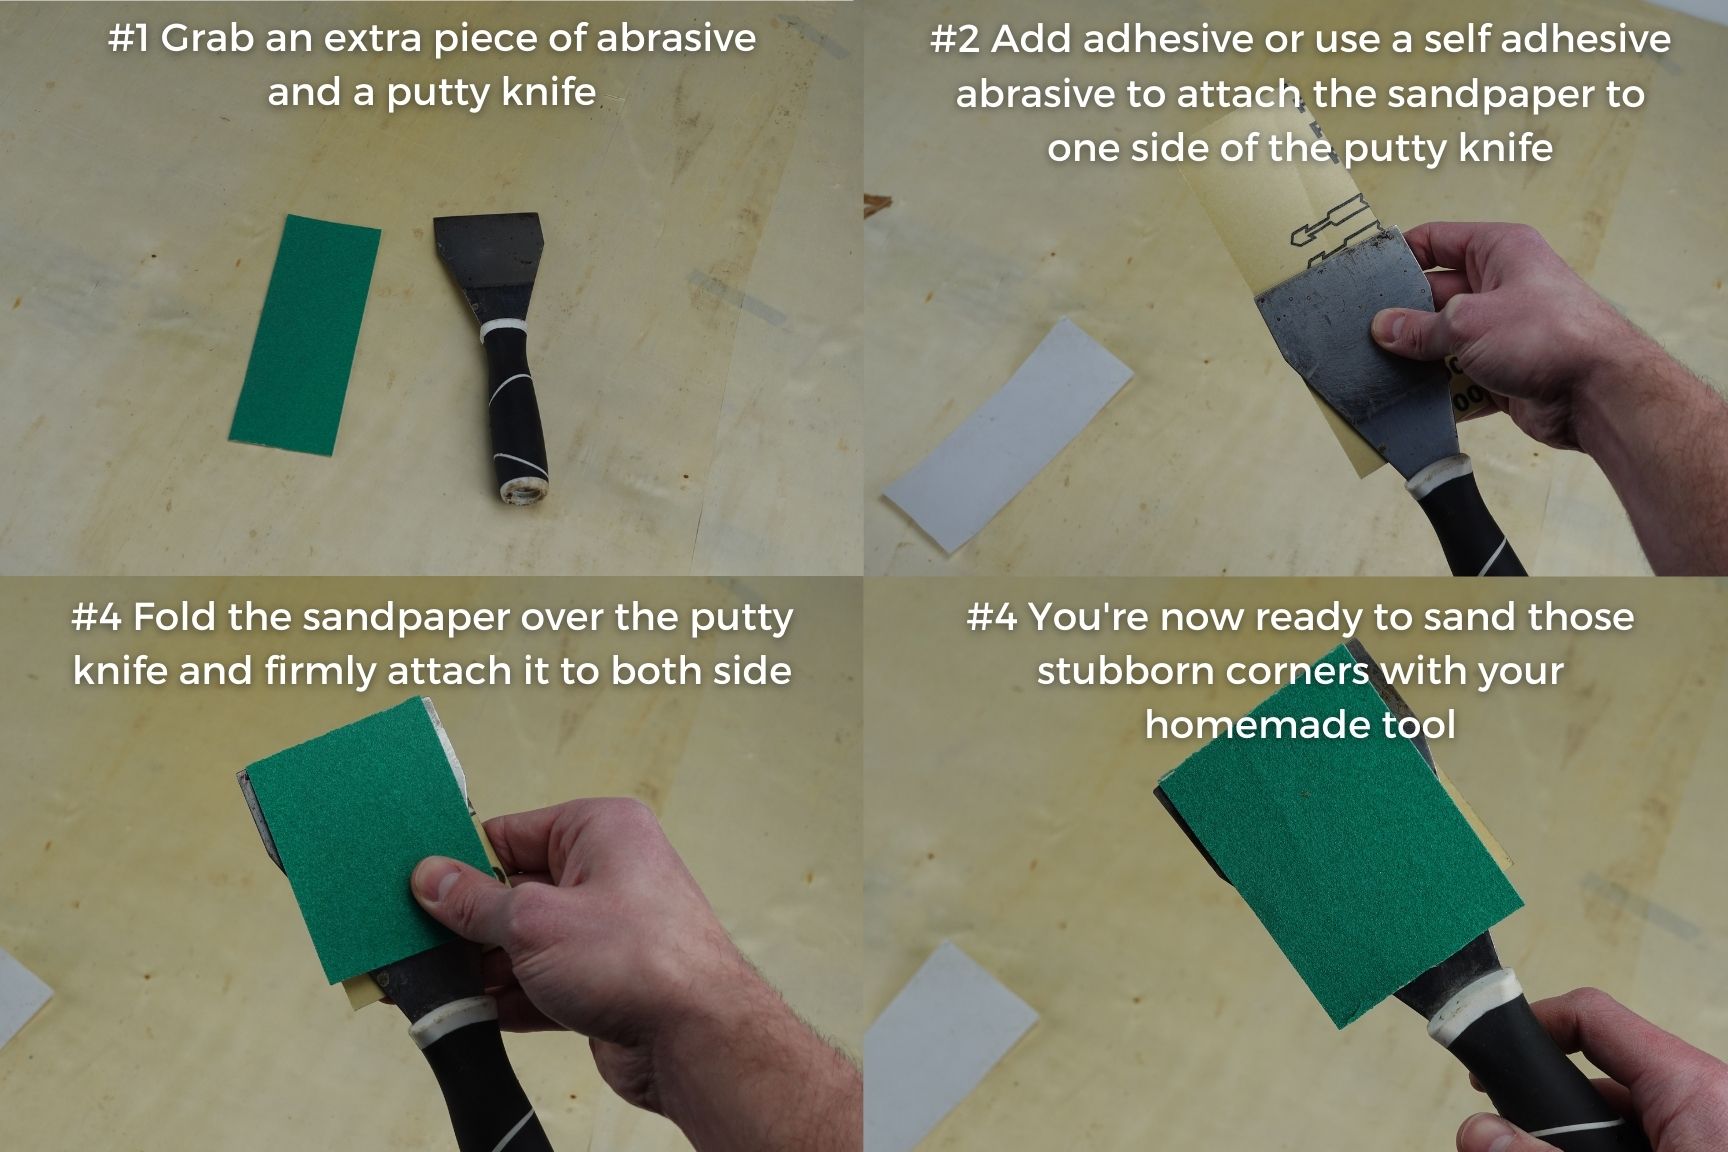 Infographic - how to sand tight corners with putty scraper